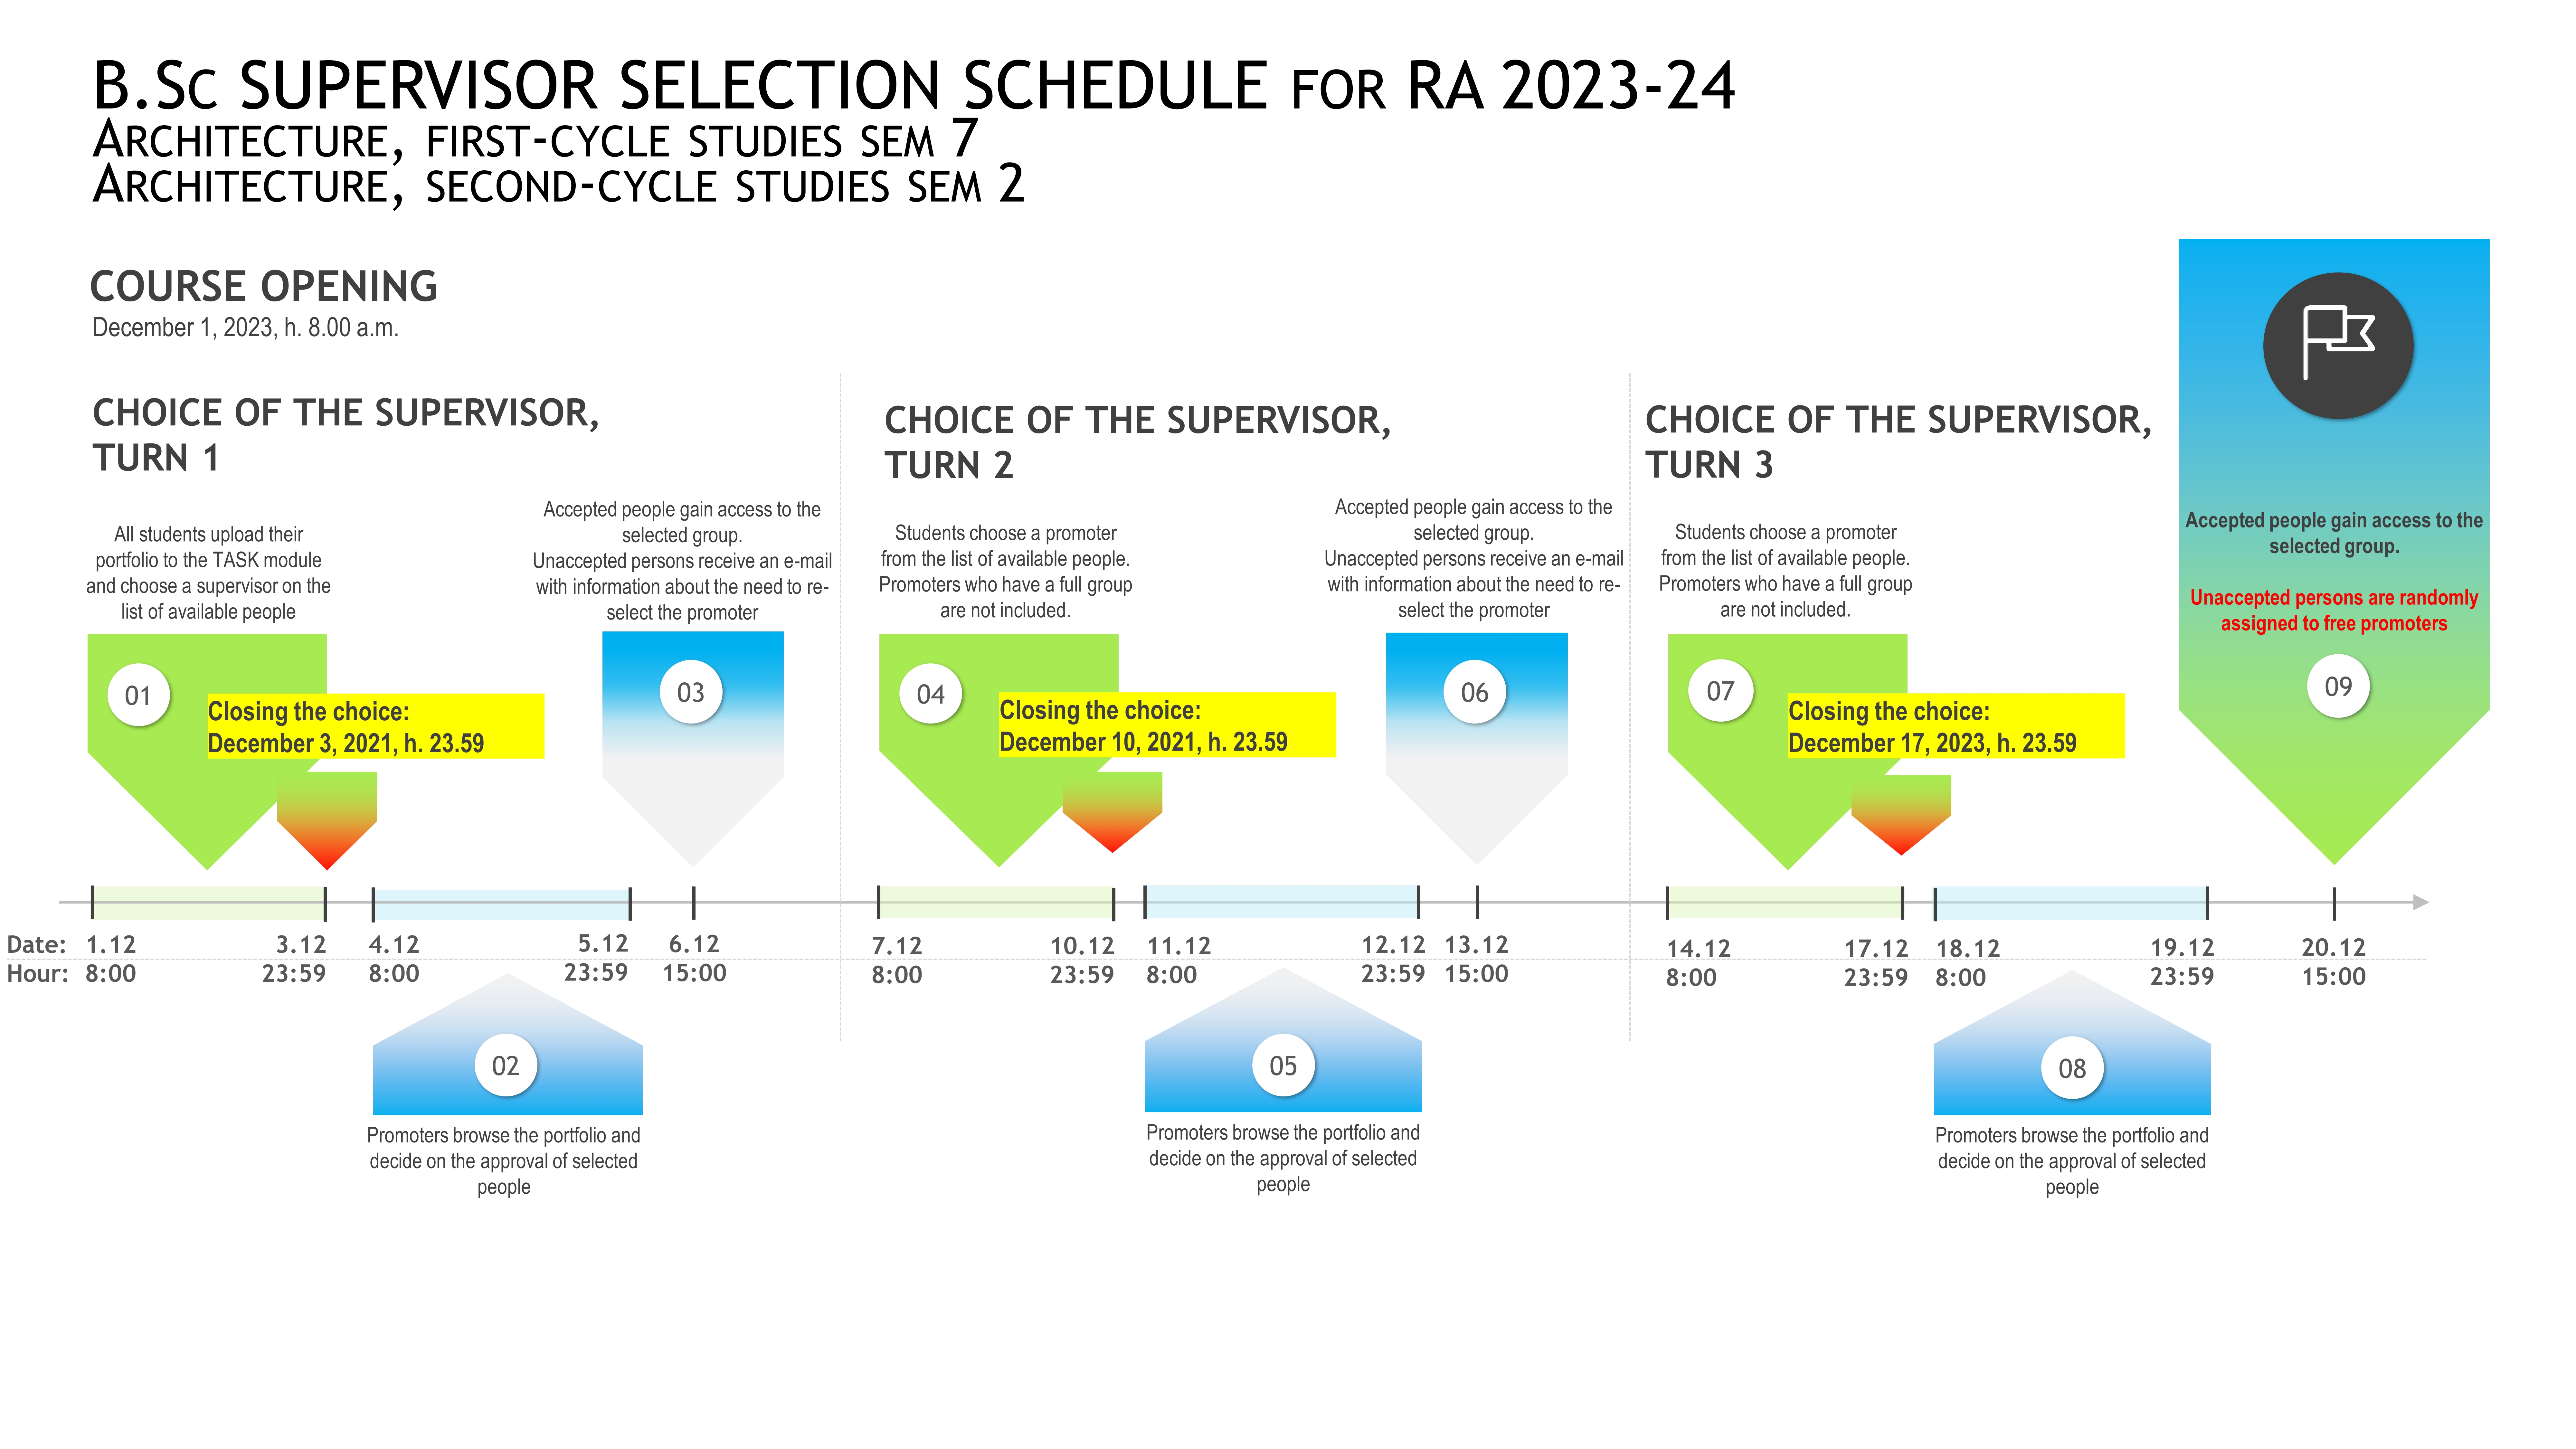 Supervisor selection schedule for RA 2023-24